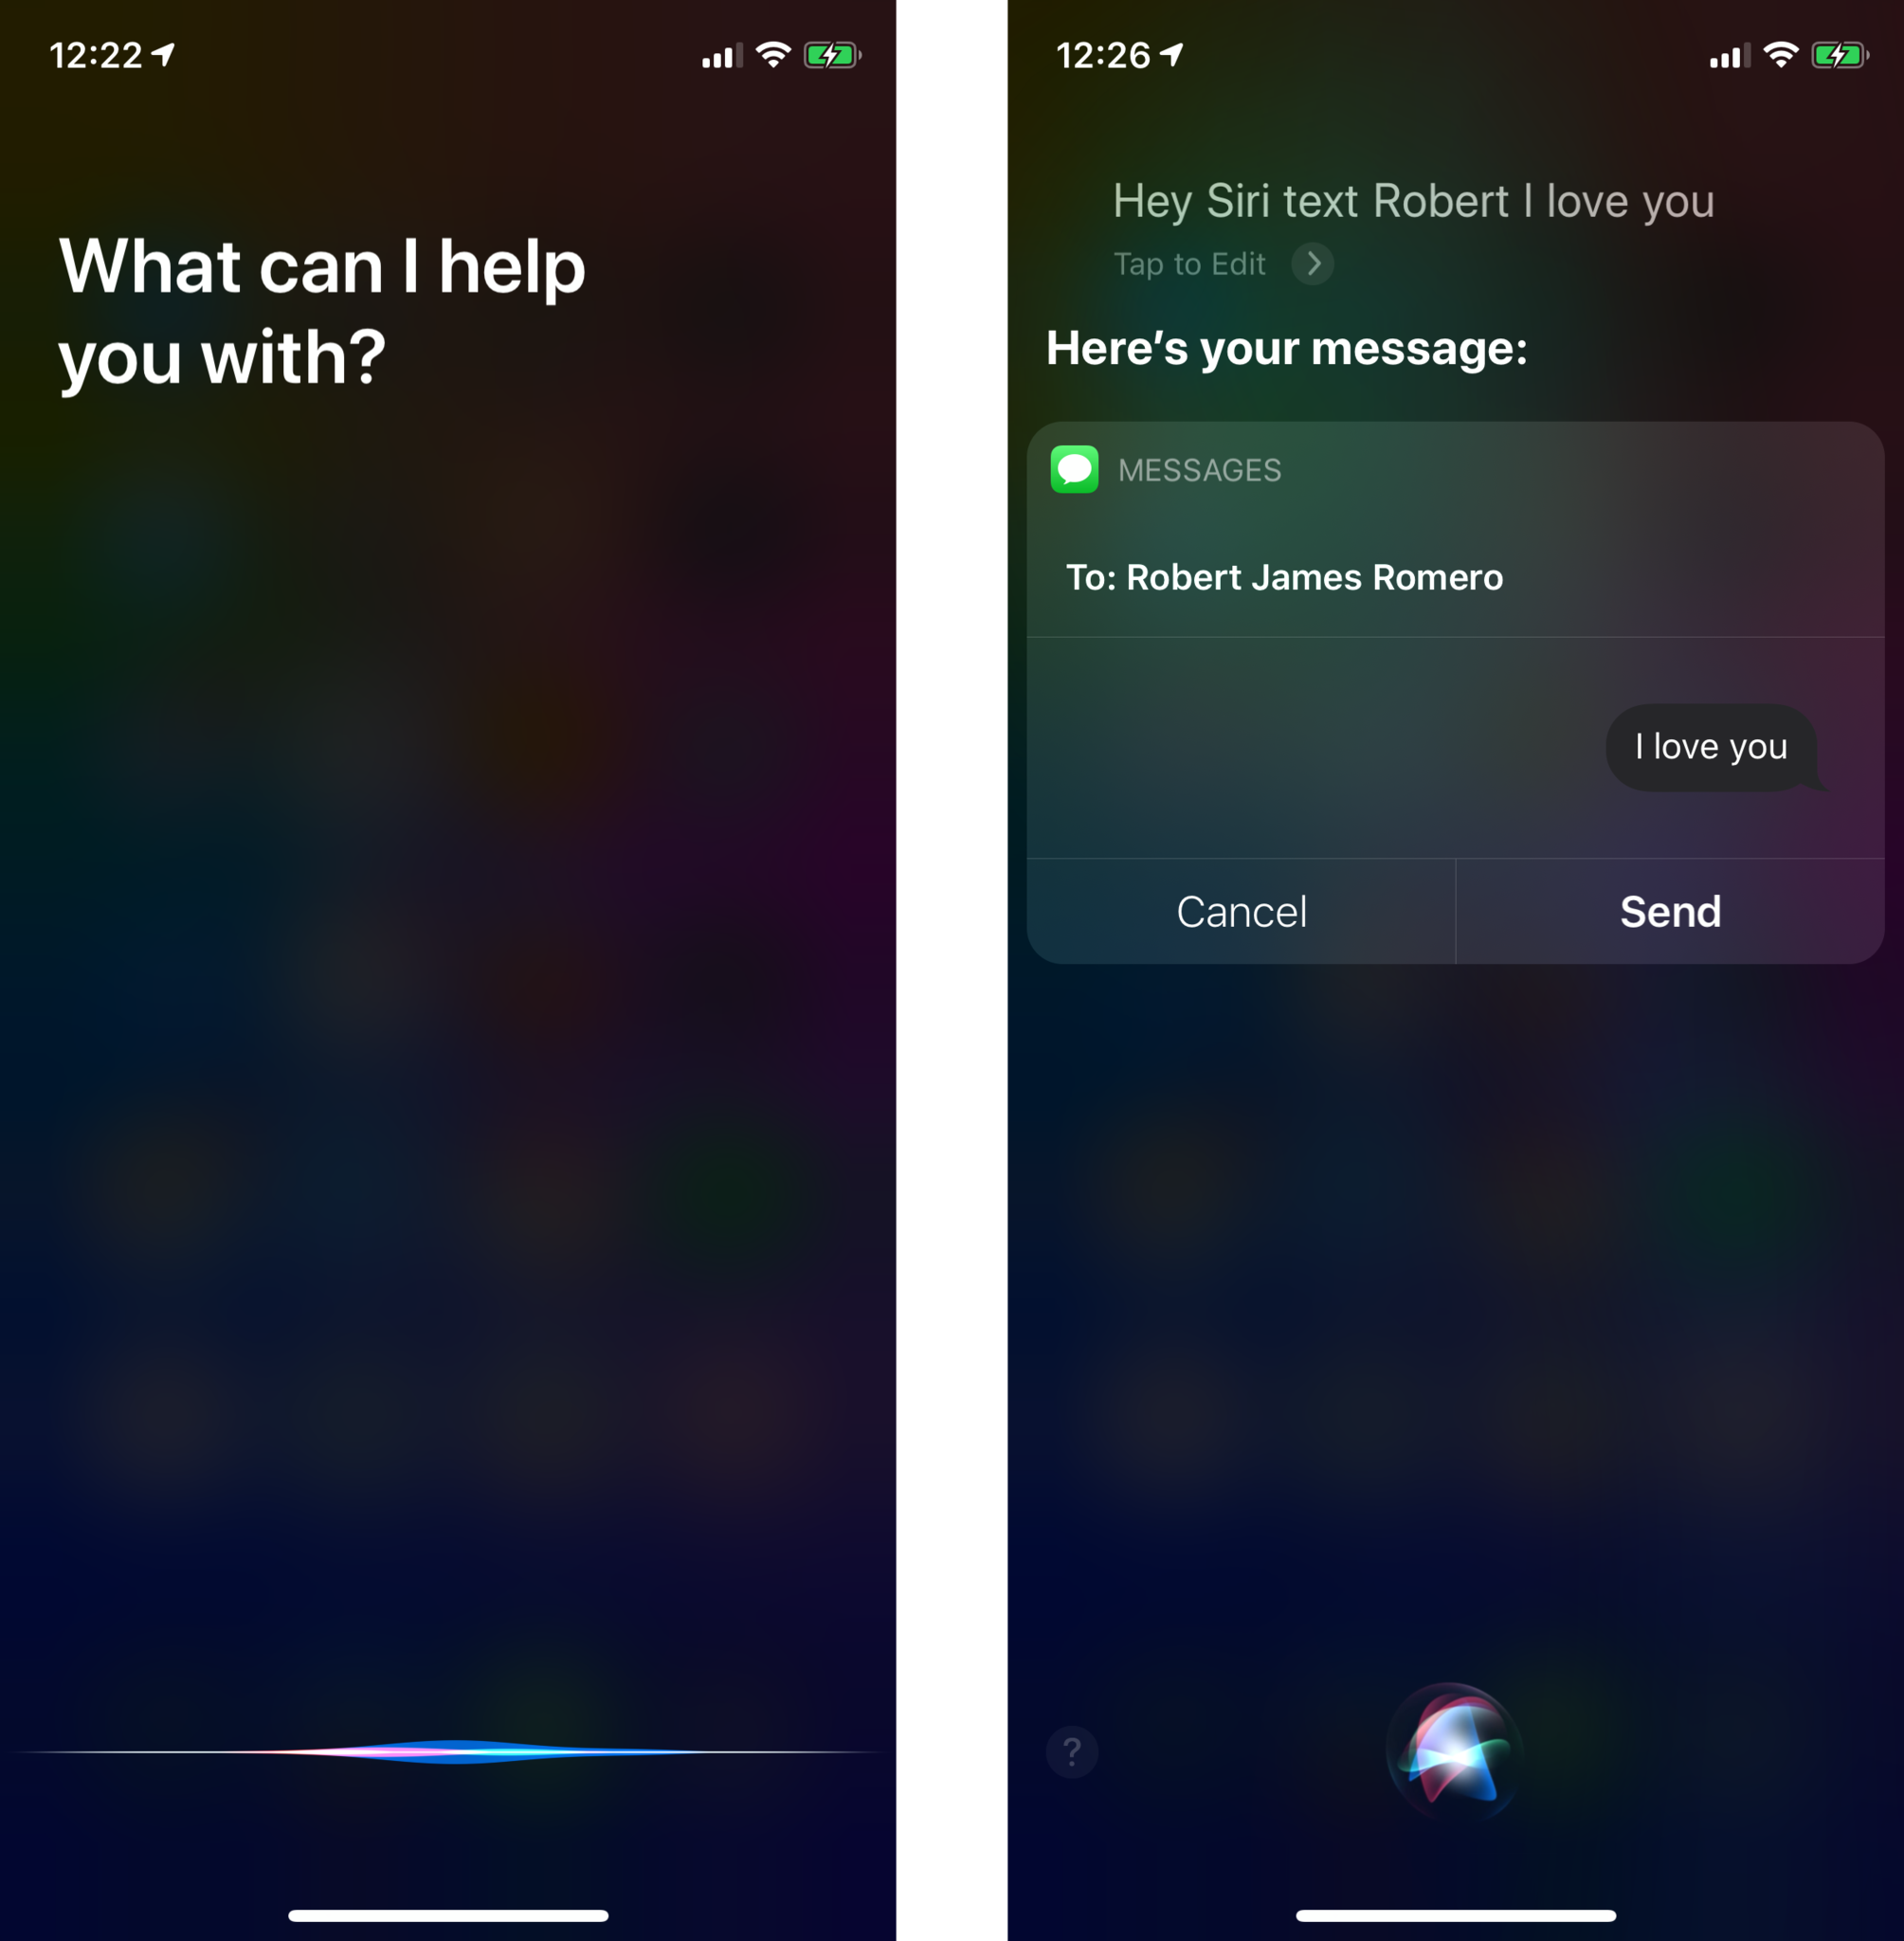 Tell Siri who you want to send an SMS to and what you want to say